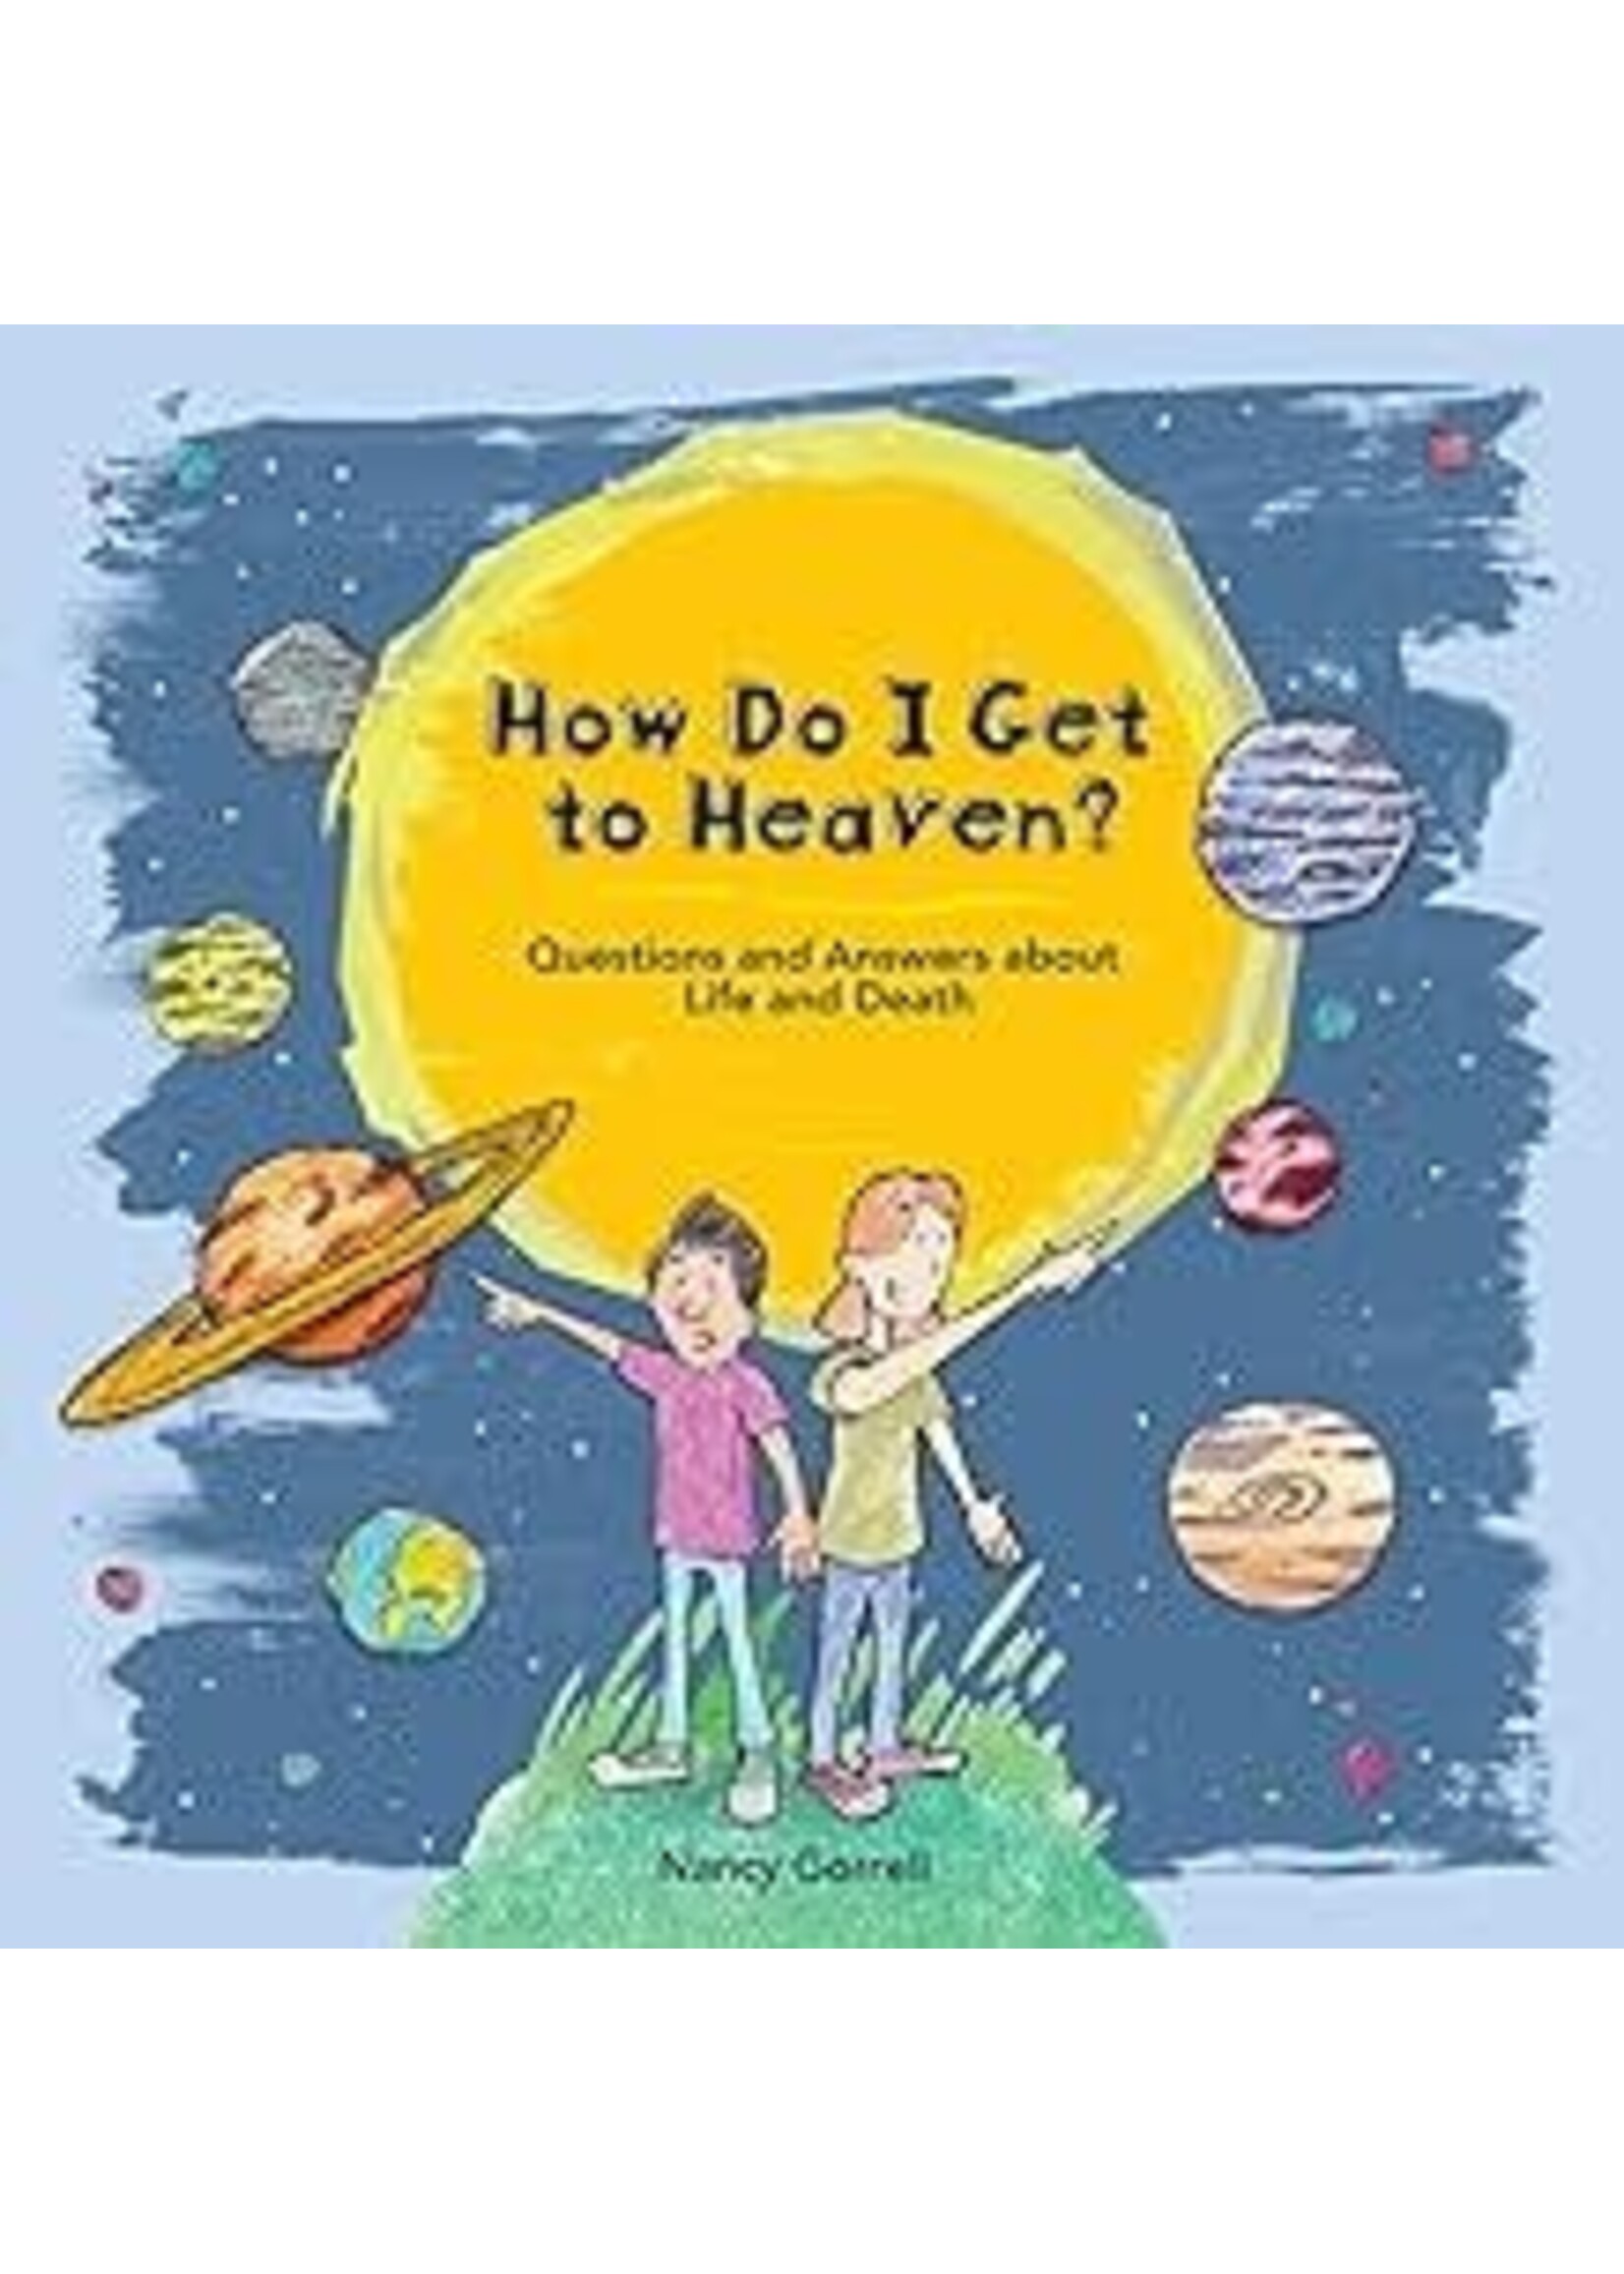 How Do I Get to Heaven? Questions and Answers About Life and Death